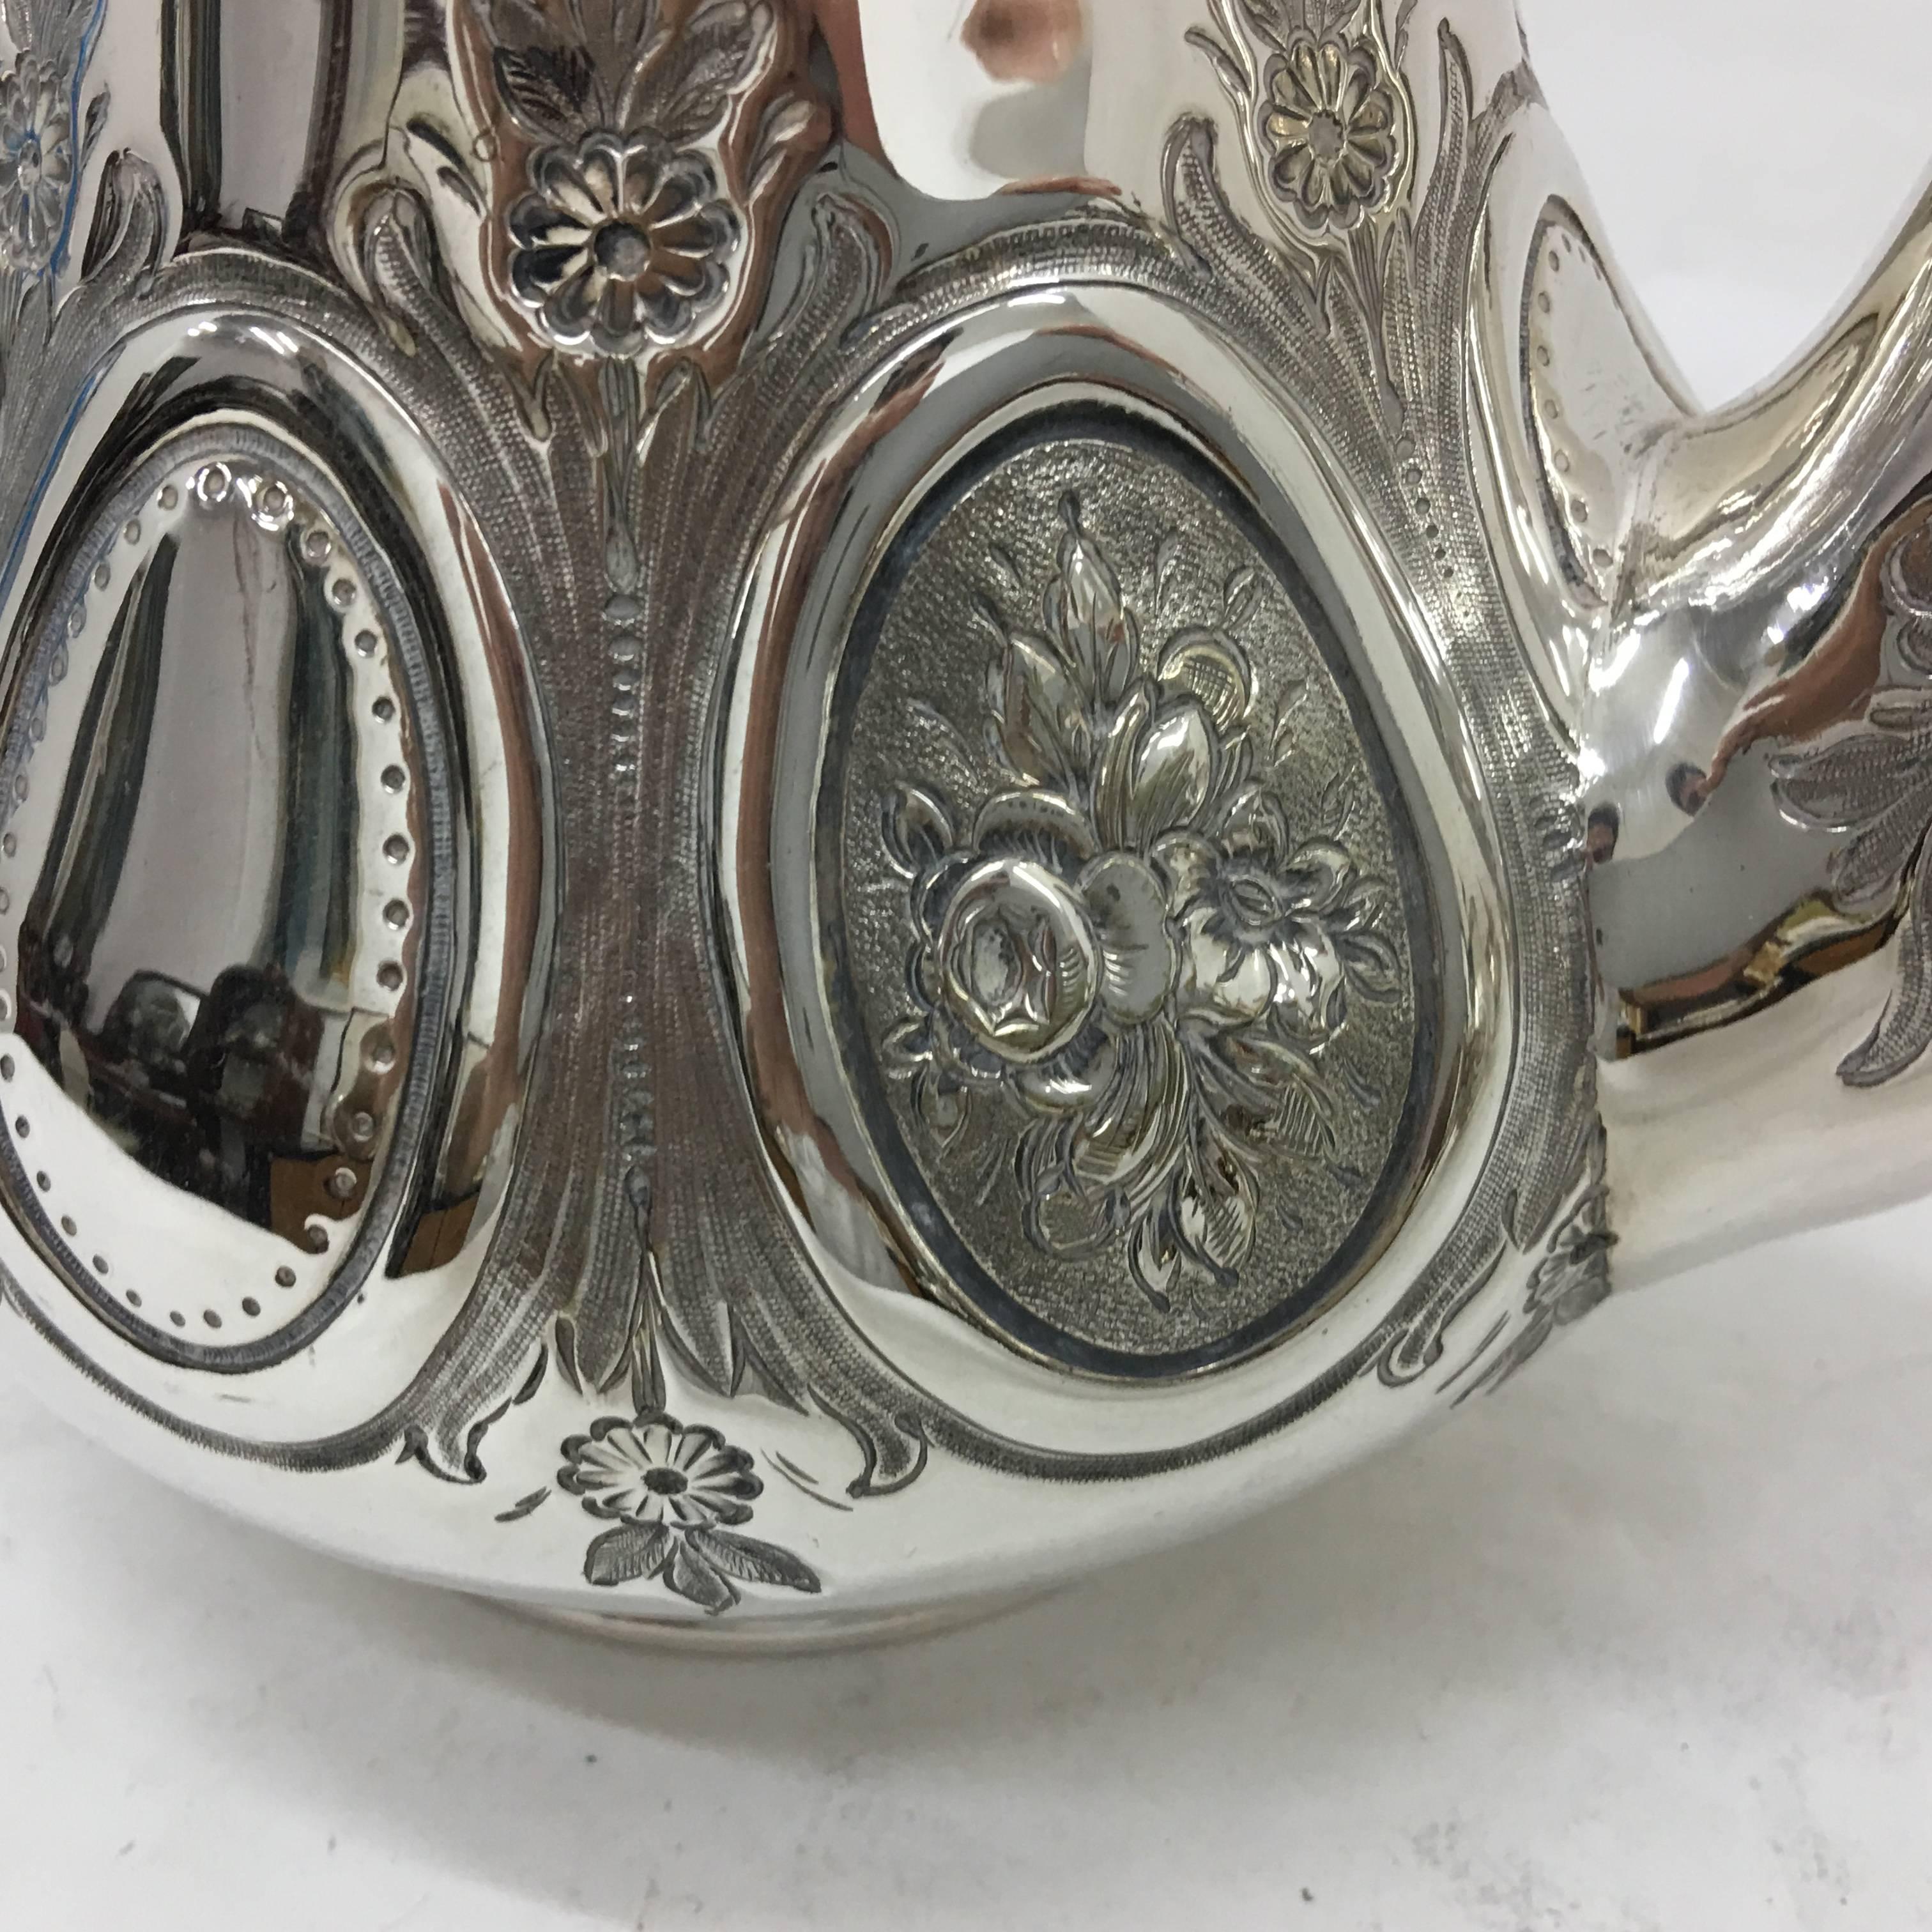 19th Century Victorian Engraved Silver Plated British Tea Set by Wilkinson 1870